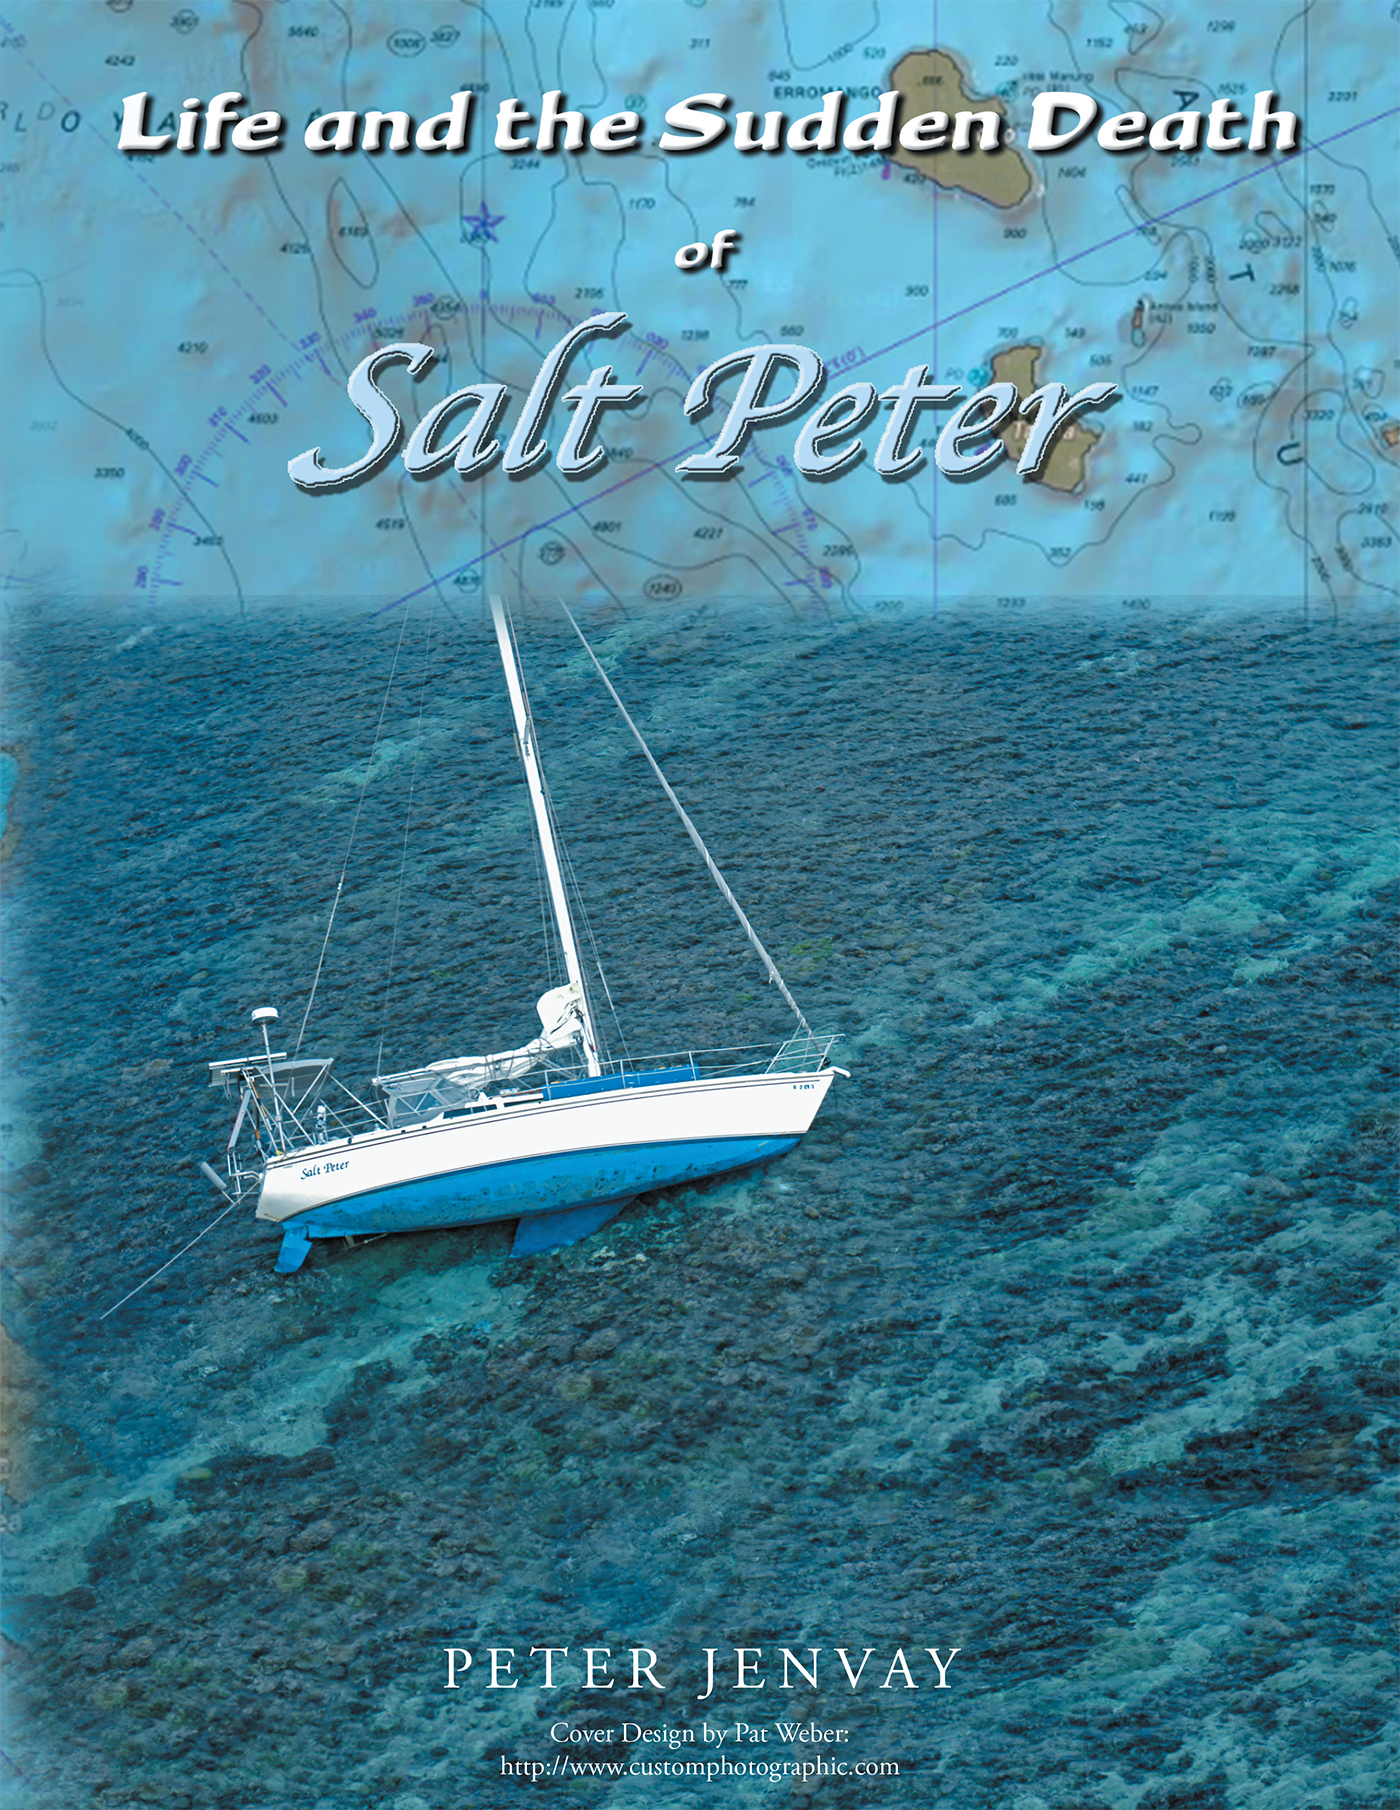 Life and the Sudden Death of Salt Peter Cover Image